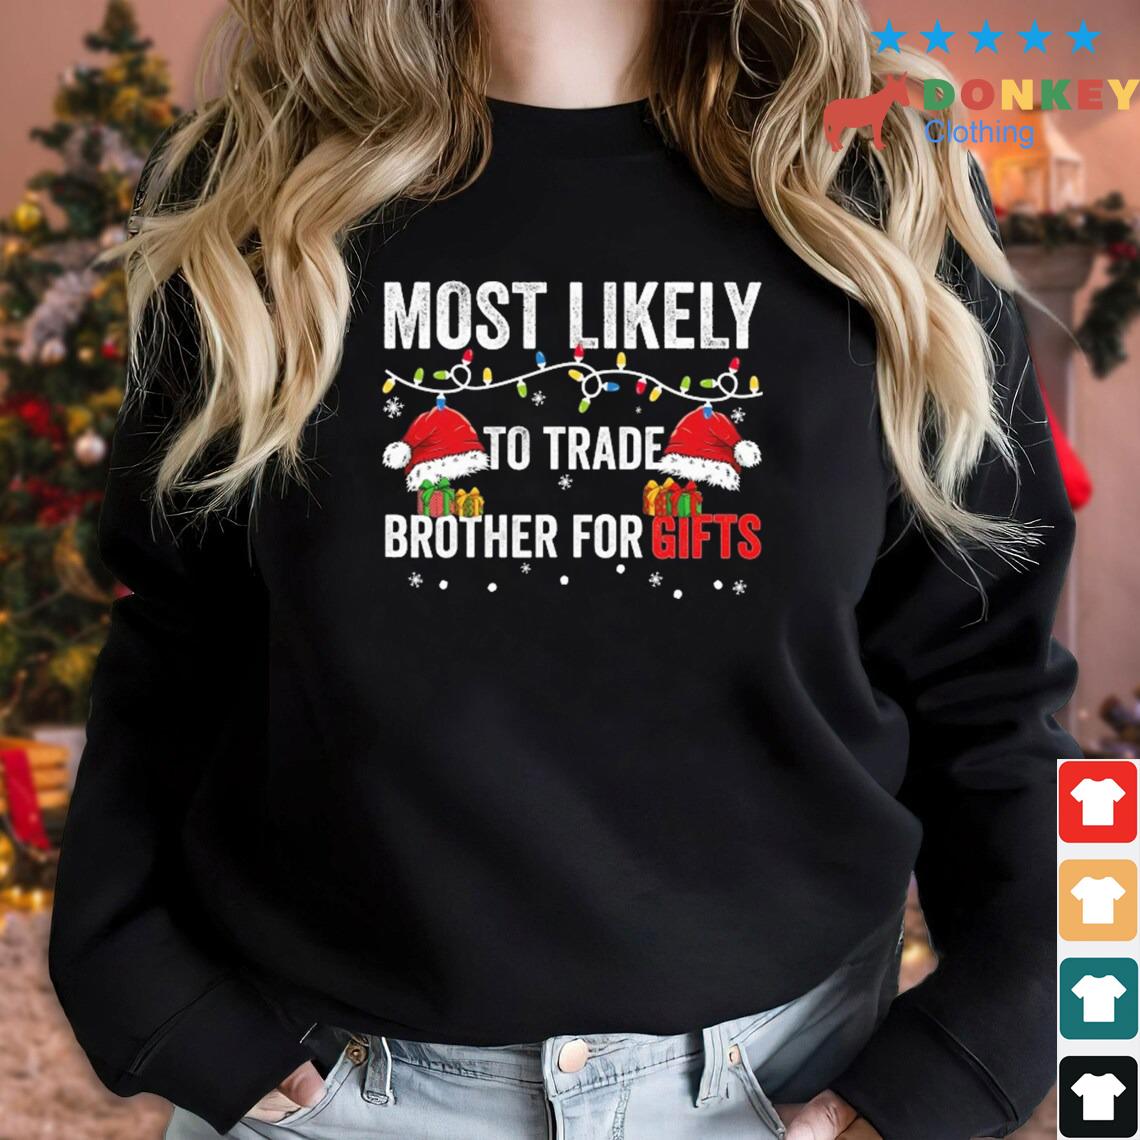 Most Likely To Trade Brother For Christmas Lights Sweater